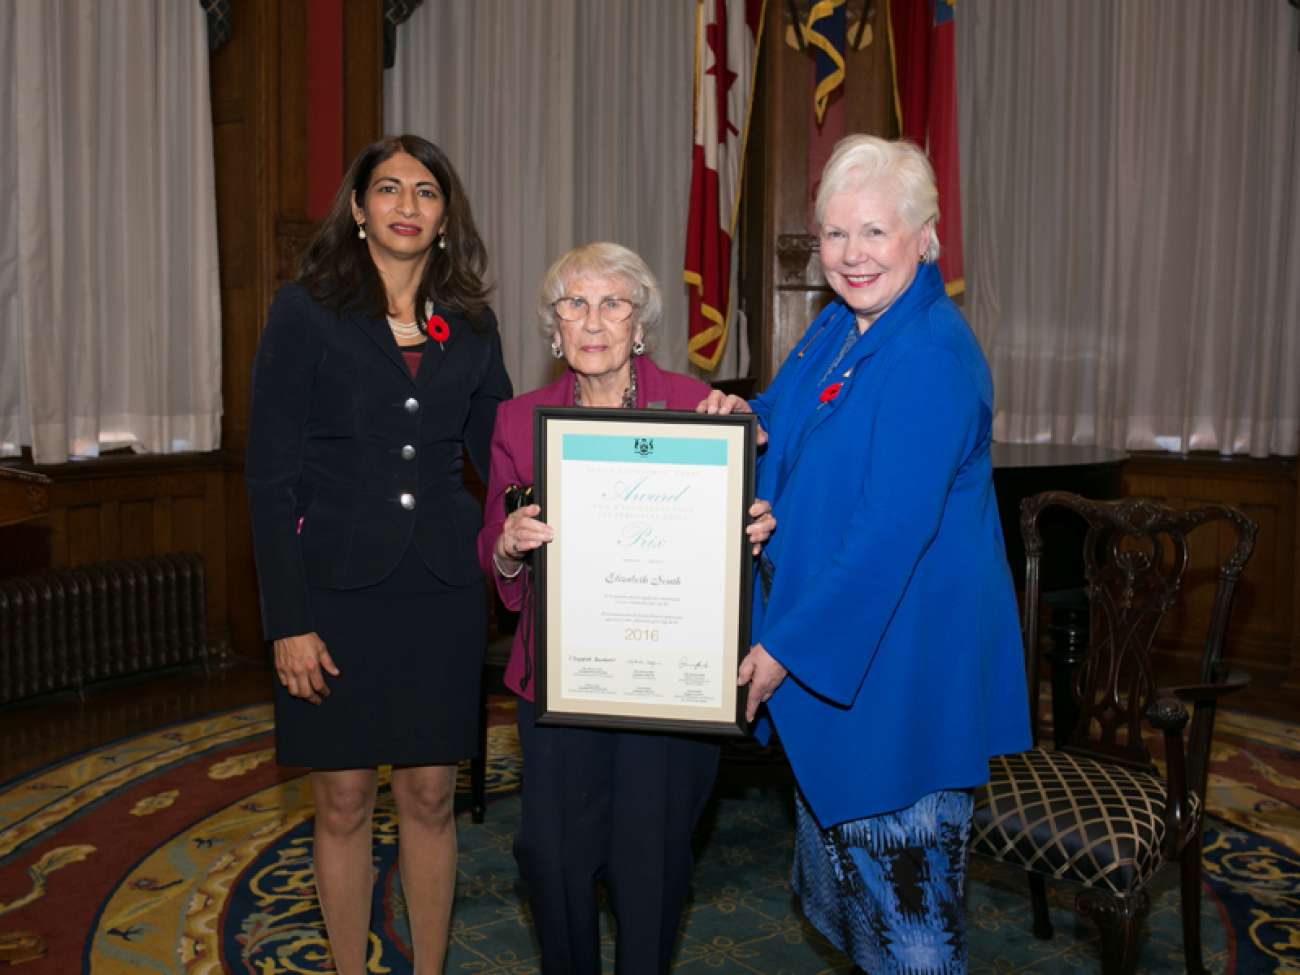 Betty South receives her award from the Hon. Dipika Damerla, Minister Responsible for Seniors Affairs (left) and the Hon. Elizabeth Dowdeswell, Lieutenant Governor of Ontario (right). Photo courtesy of the Government of Ontario.